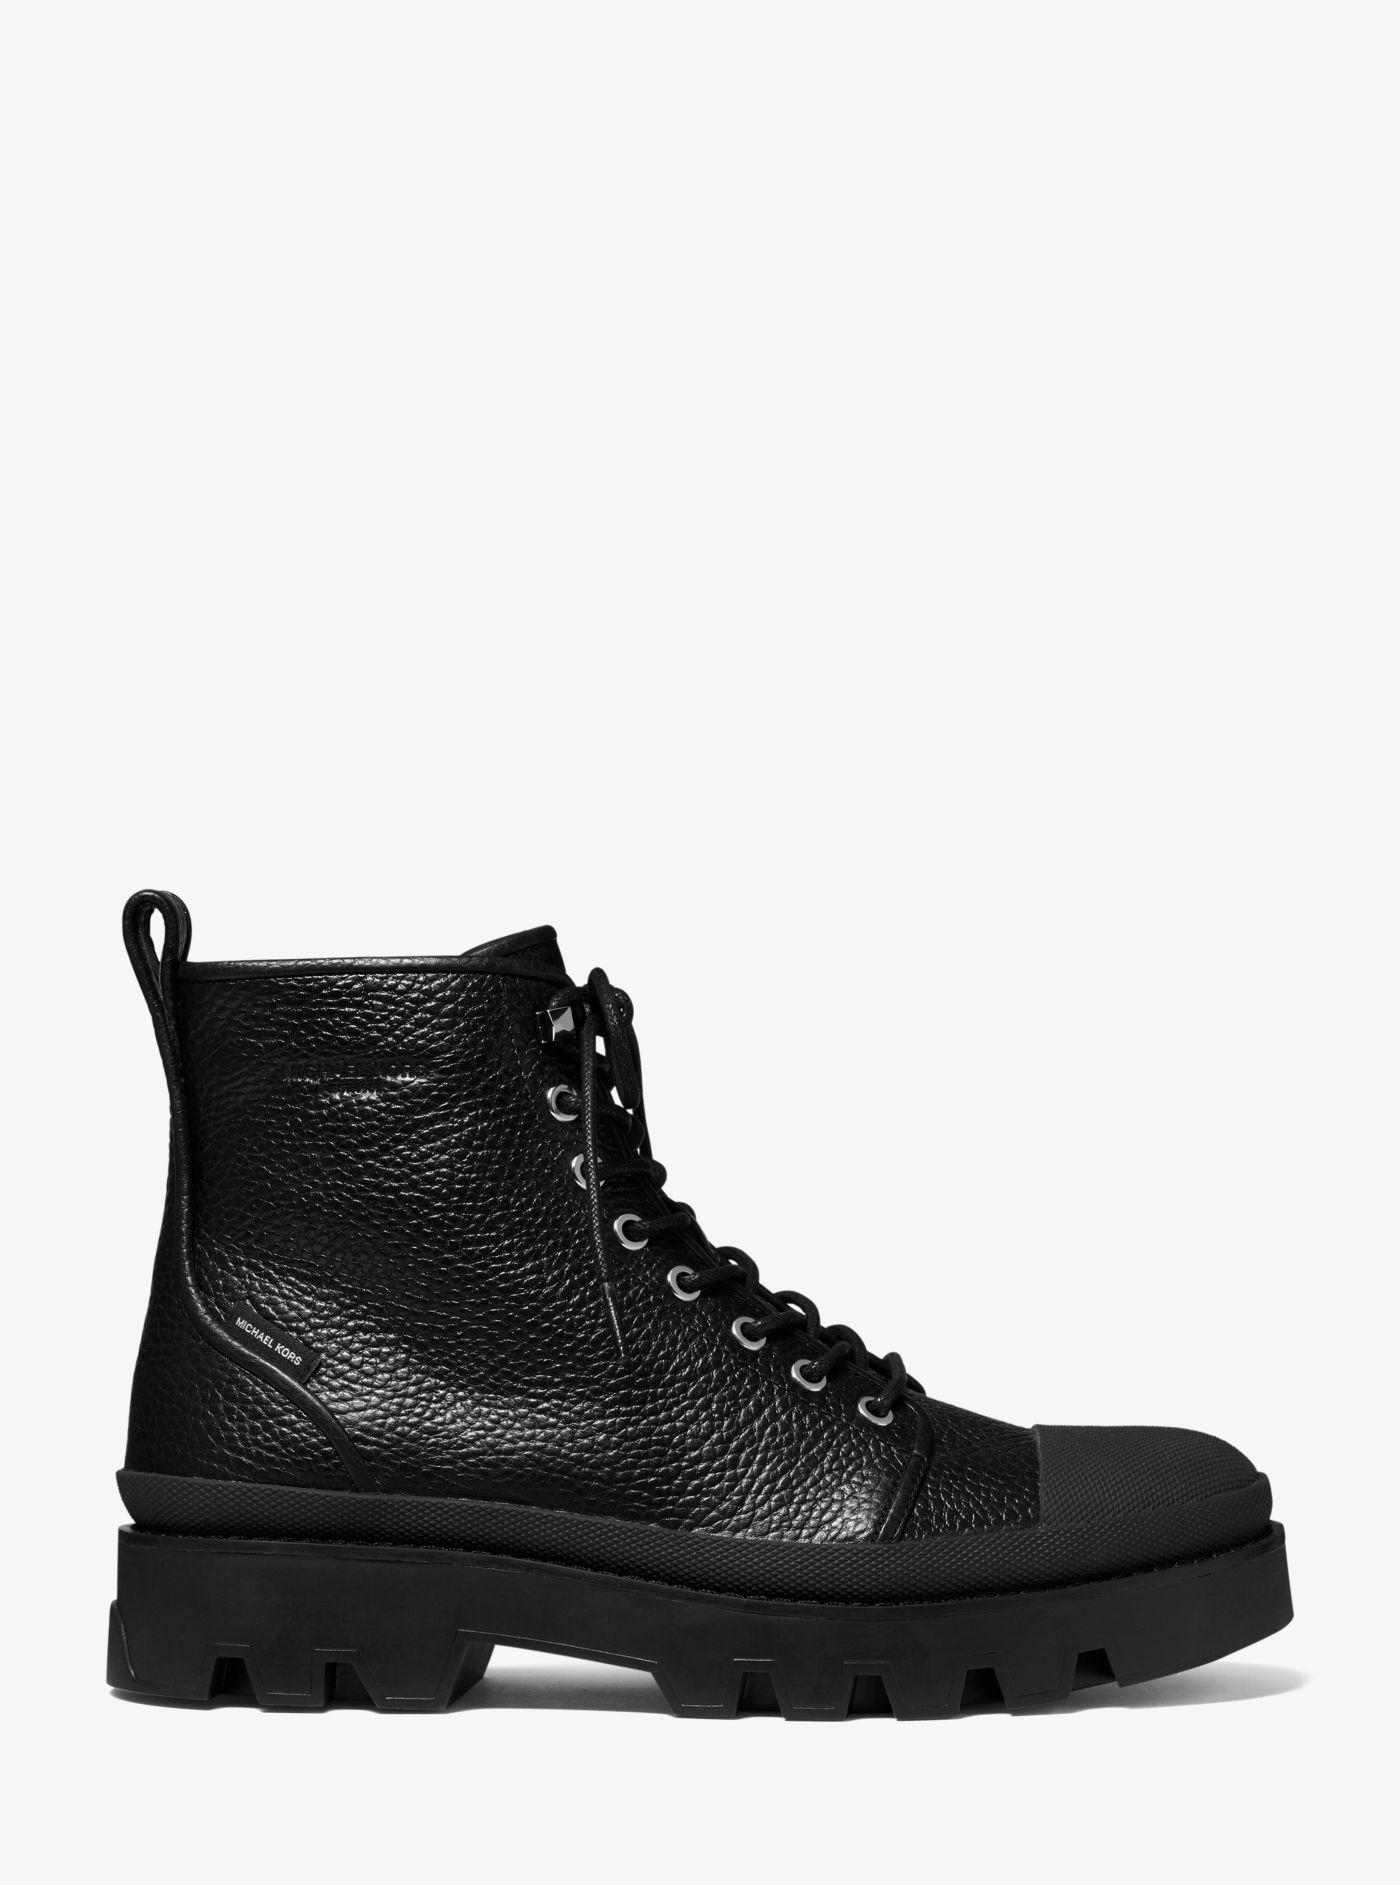 Michael Kors Colin Pebbled Leather Boot in Black | Lyst